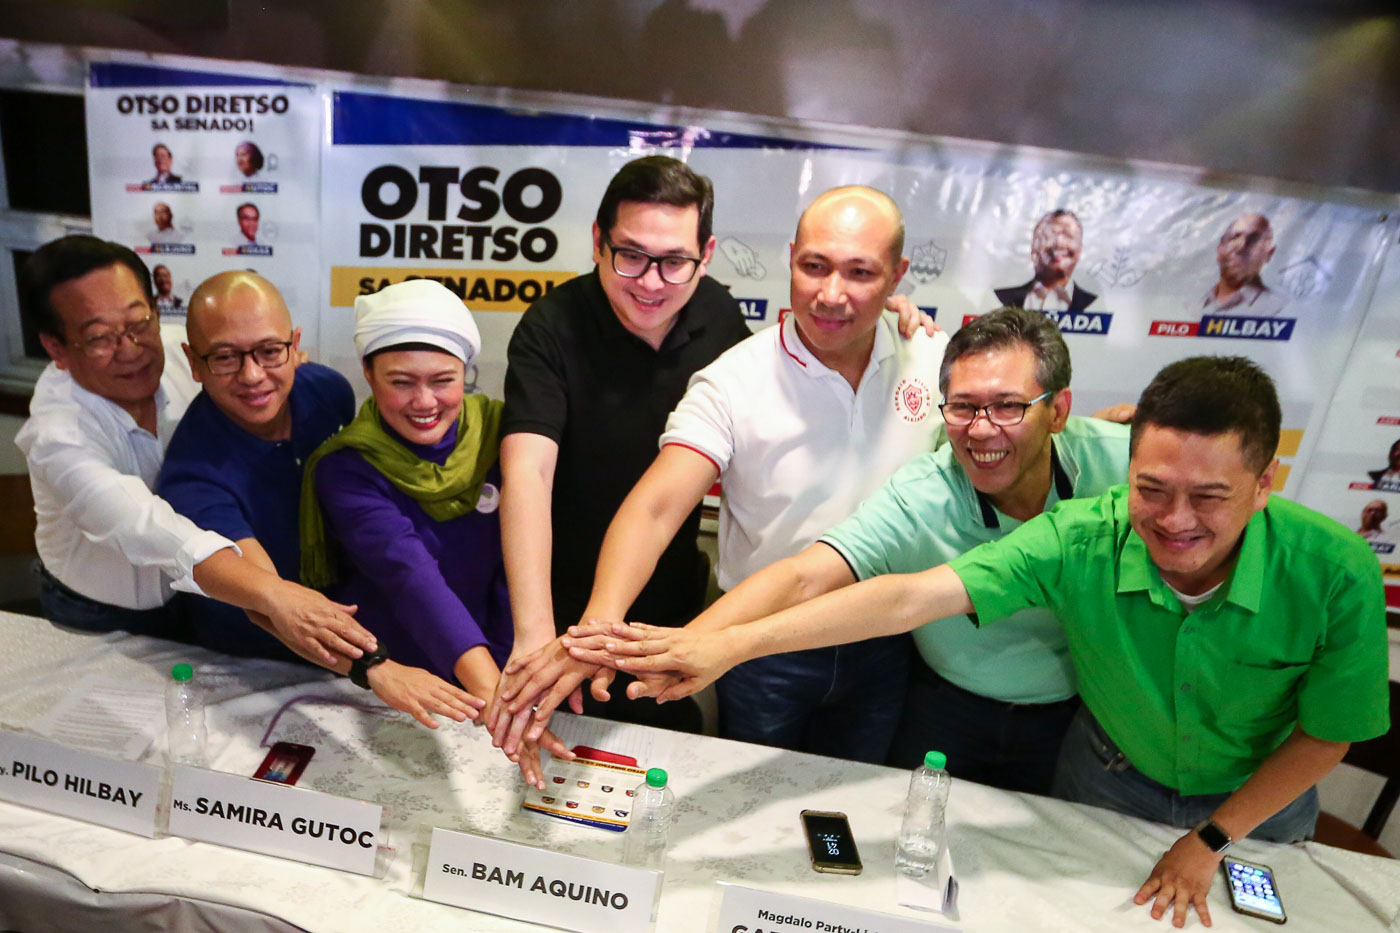 KICKOFF. Otso Diretso slate in a press conference on February 12, 2019 in Caloocan City, to kick-off their campaign for the midterm elections. Photo by Jire Carreon/Rappler 